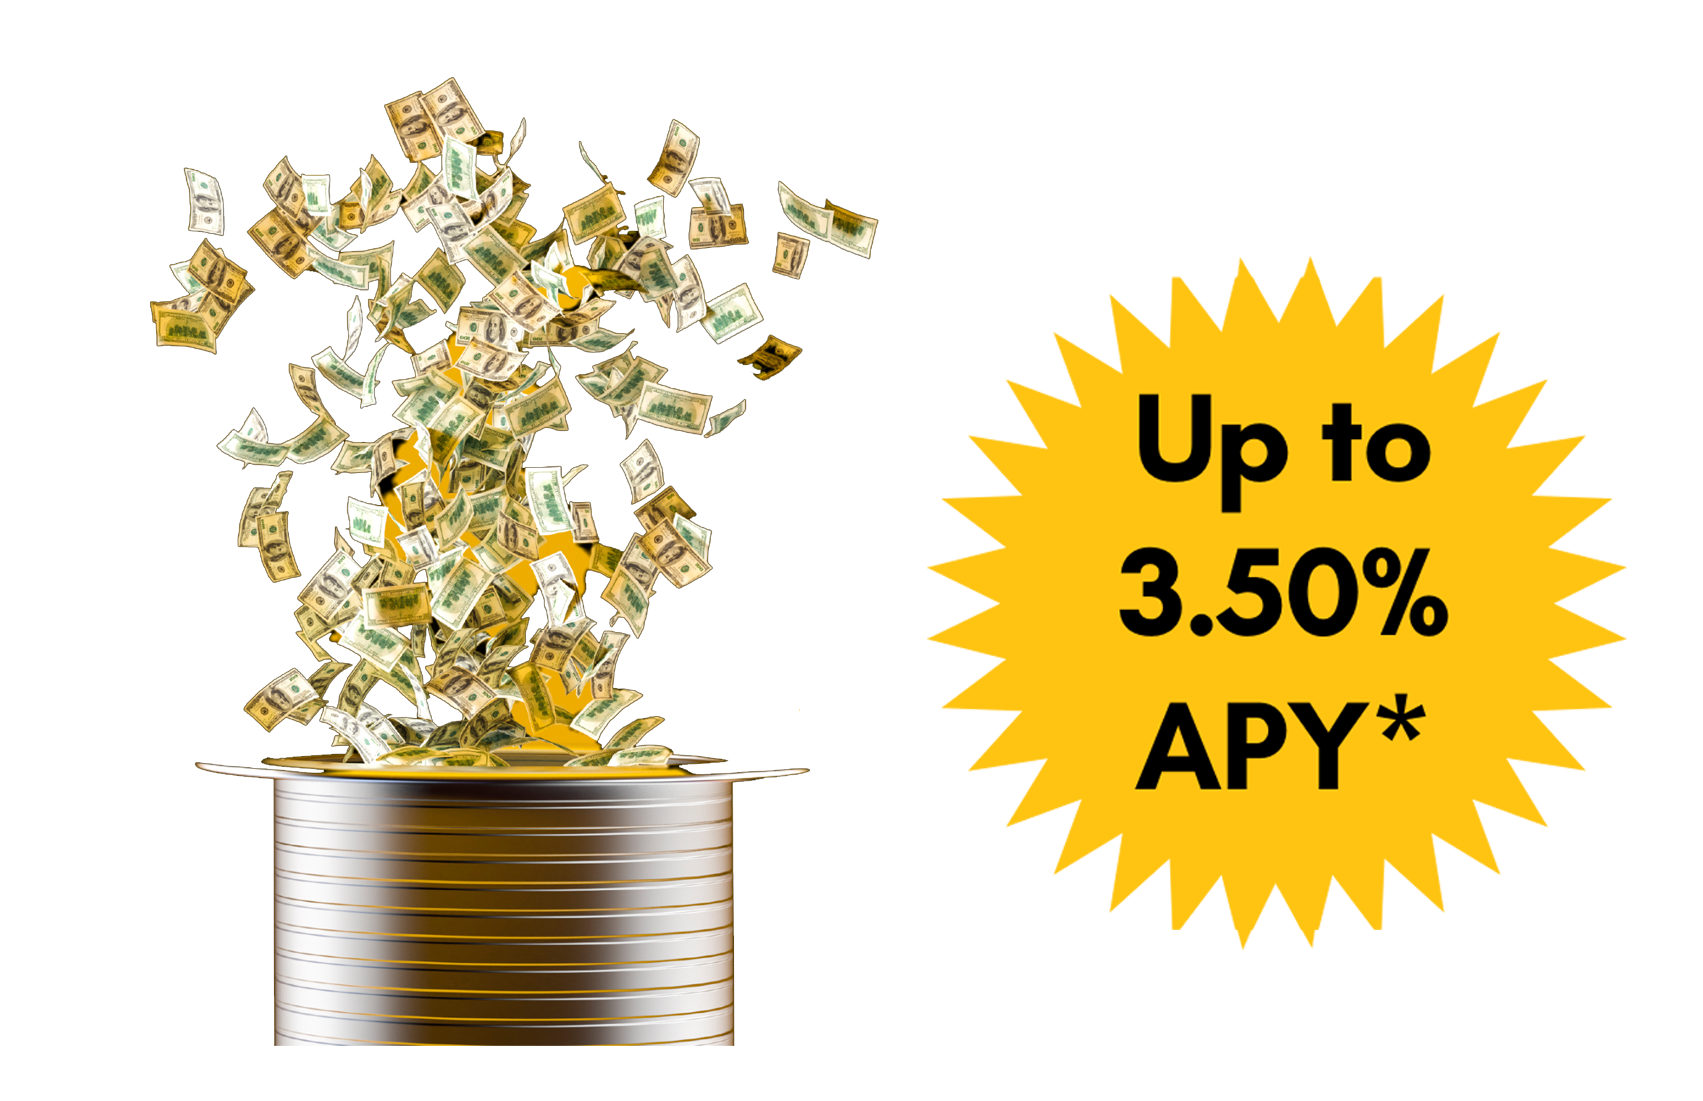 money falling into a hat shaped container and star with rate of up to 3.50% APY* displayed